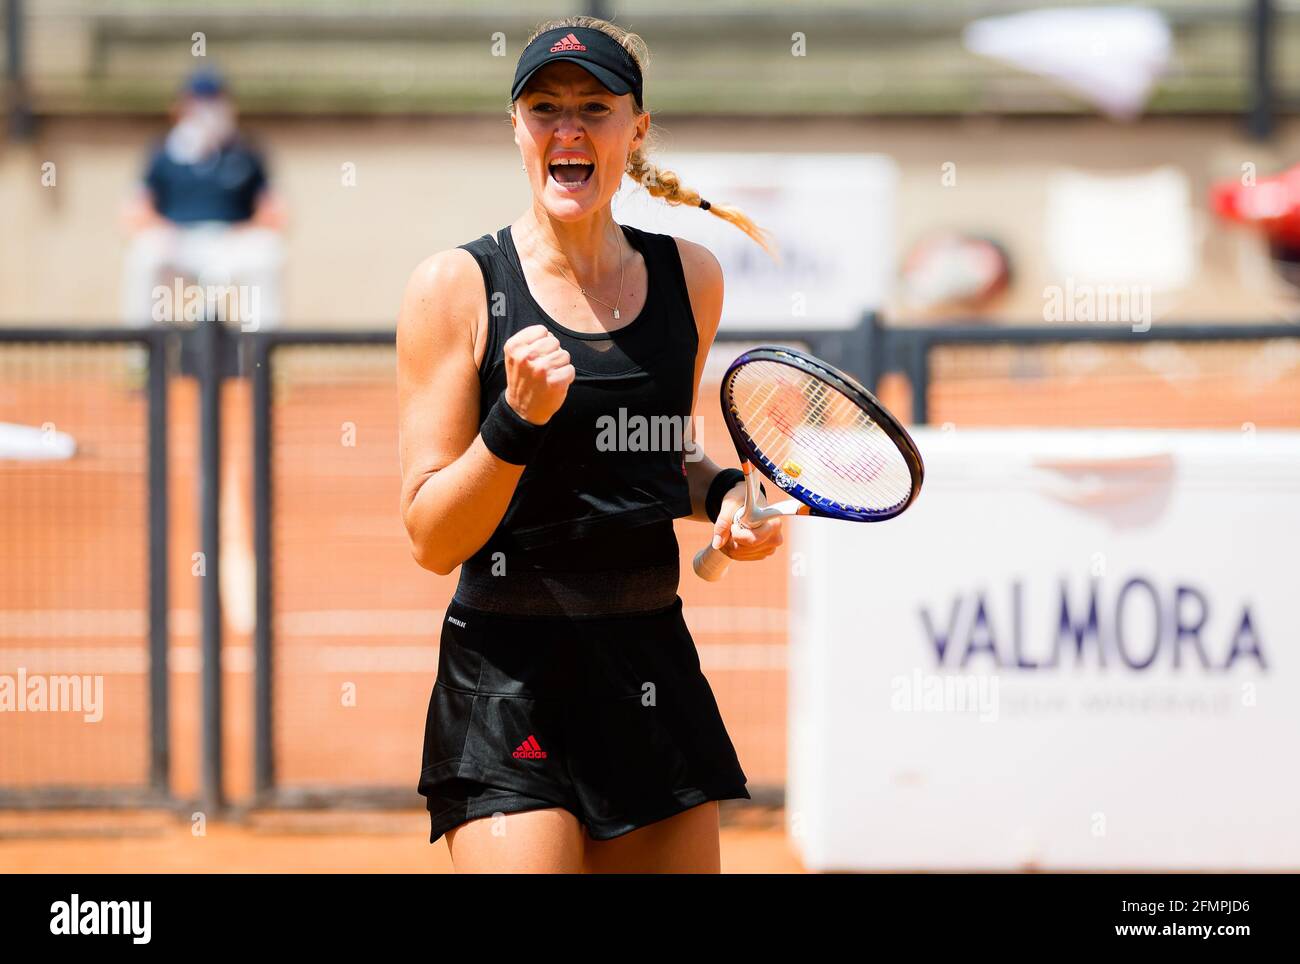 Rome, Italy. 11th May, 2021. Foro Italico in Rome, Italy, May 11, 2021,  Kristina Mladenovic of France in action during the first round of the 2021  Internazionali BNL d'Italia, WTA 1000 tennis